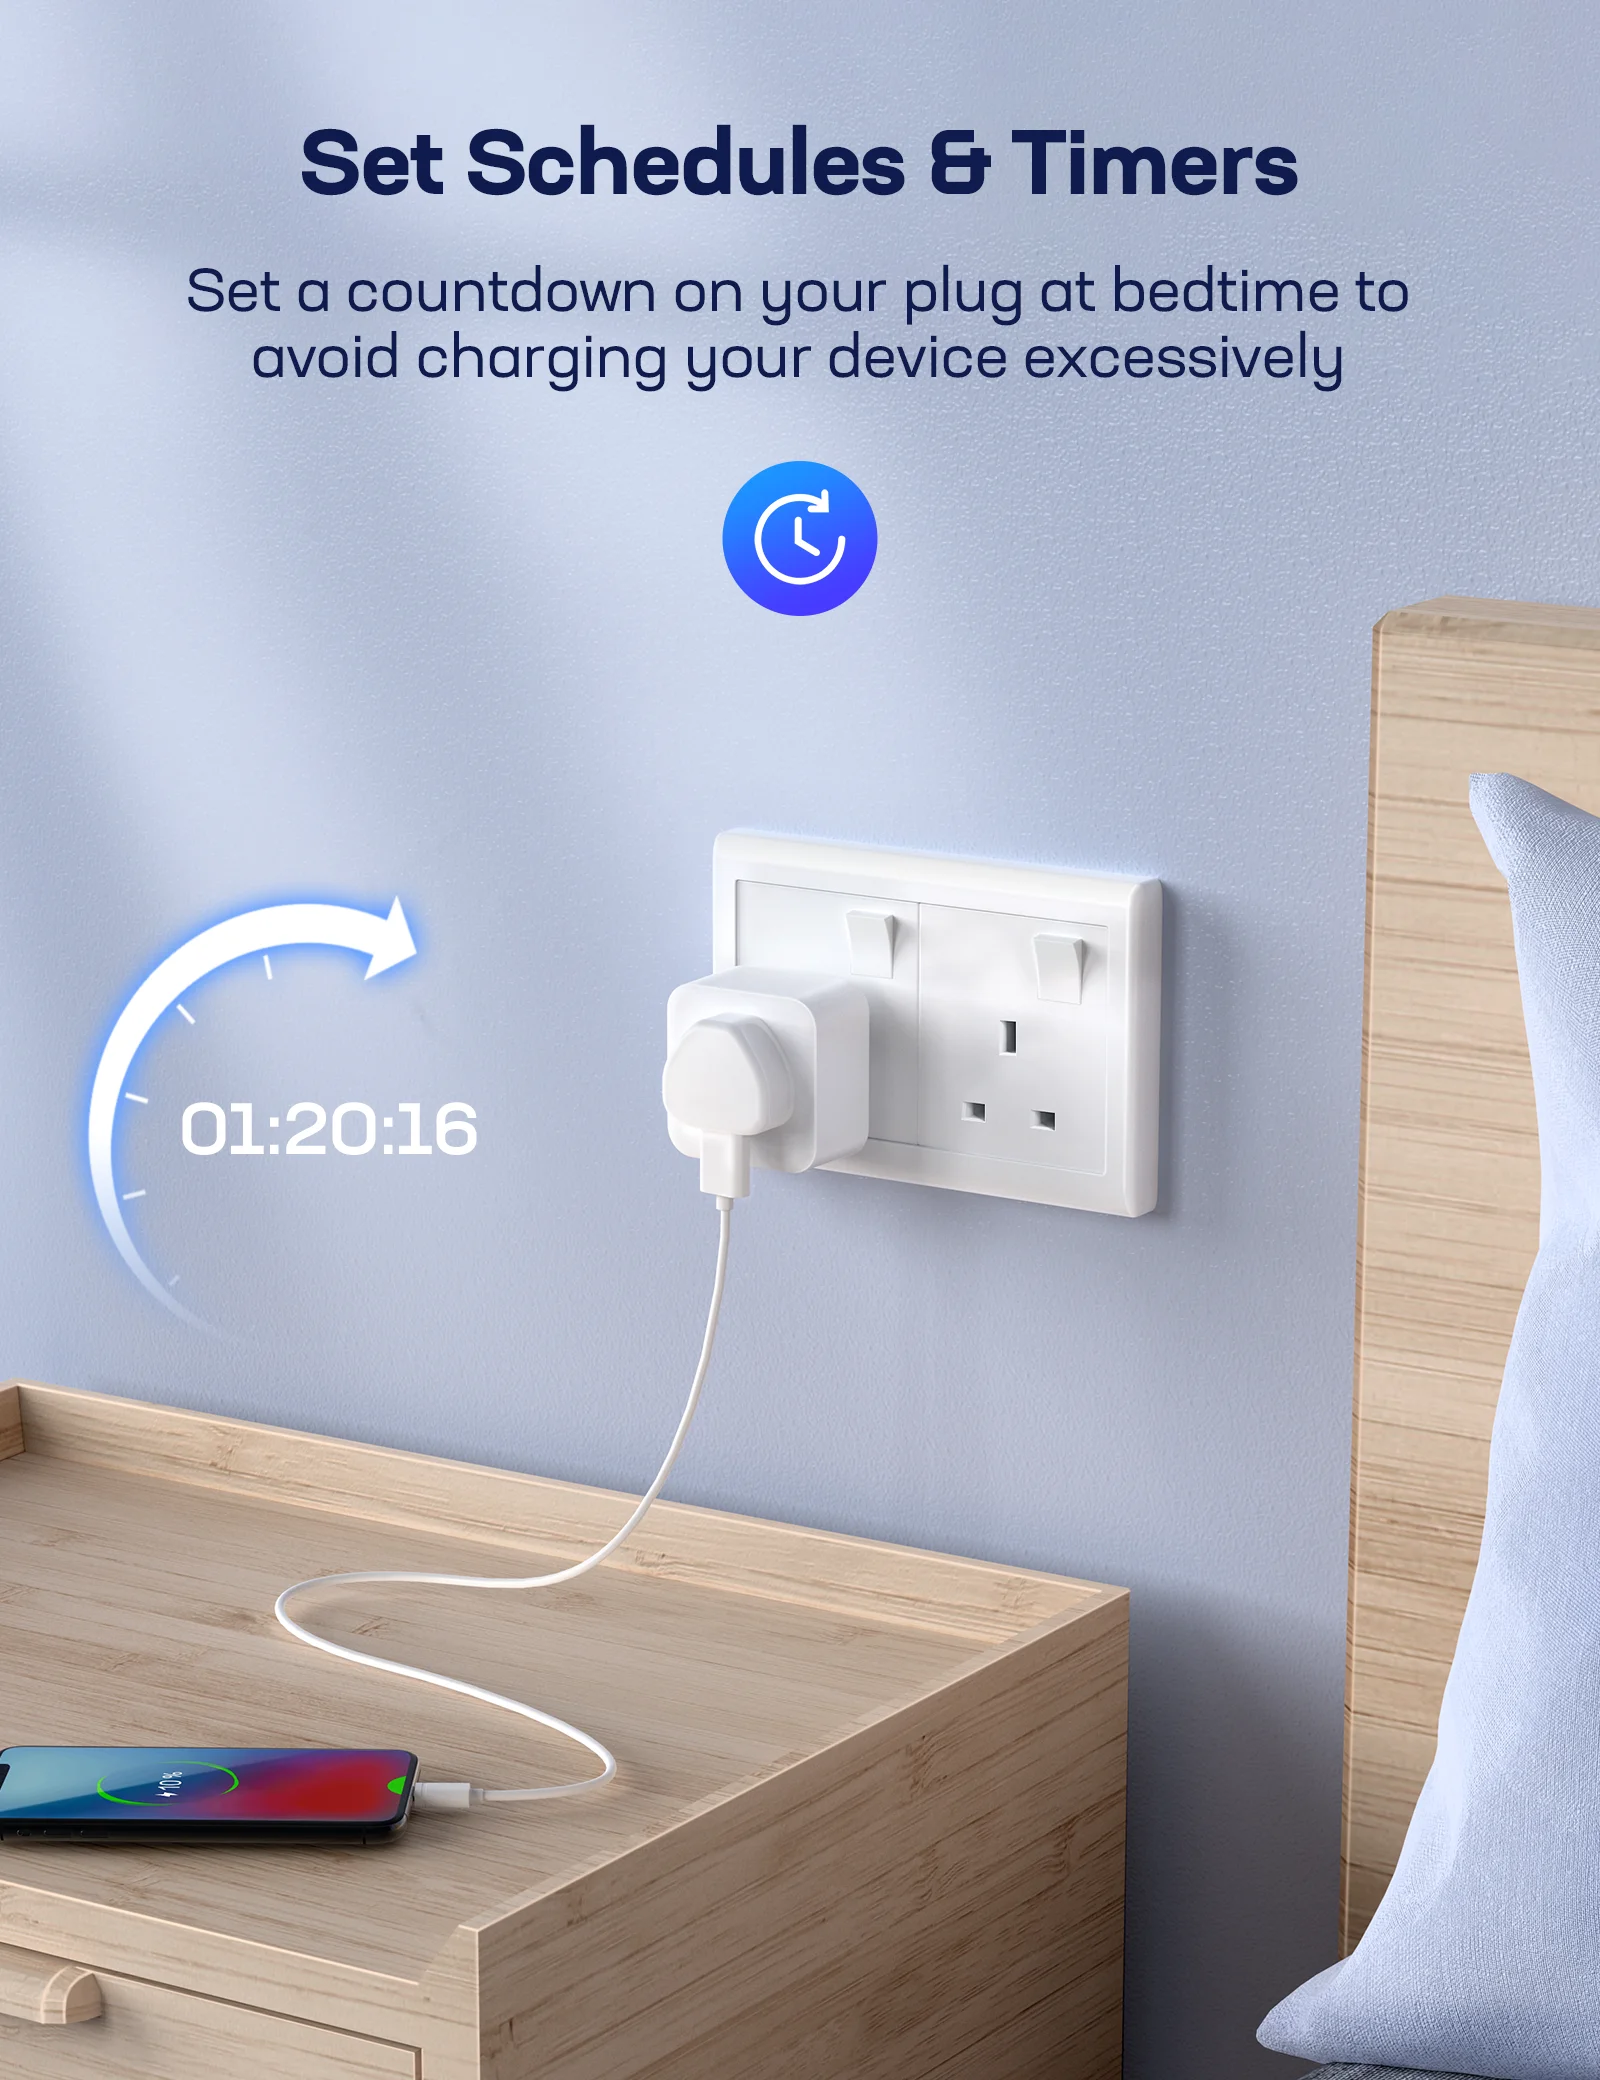 https://ae01.alicdn.com/kf/Hff5c90112c094baa901dd11872a17ef8T/Teckin-Smart-Plug-SP23-WiFi-Remote-Voice-Control-Sockets-Works-with-Alexa-Google-App-SmartThings-No.png